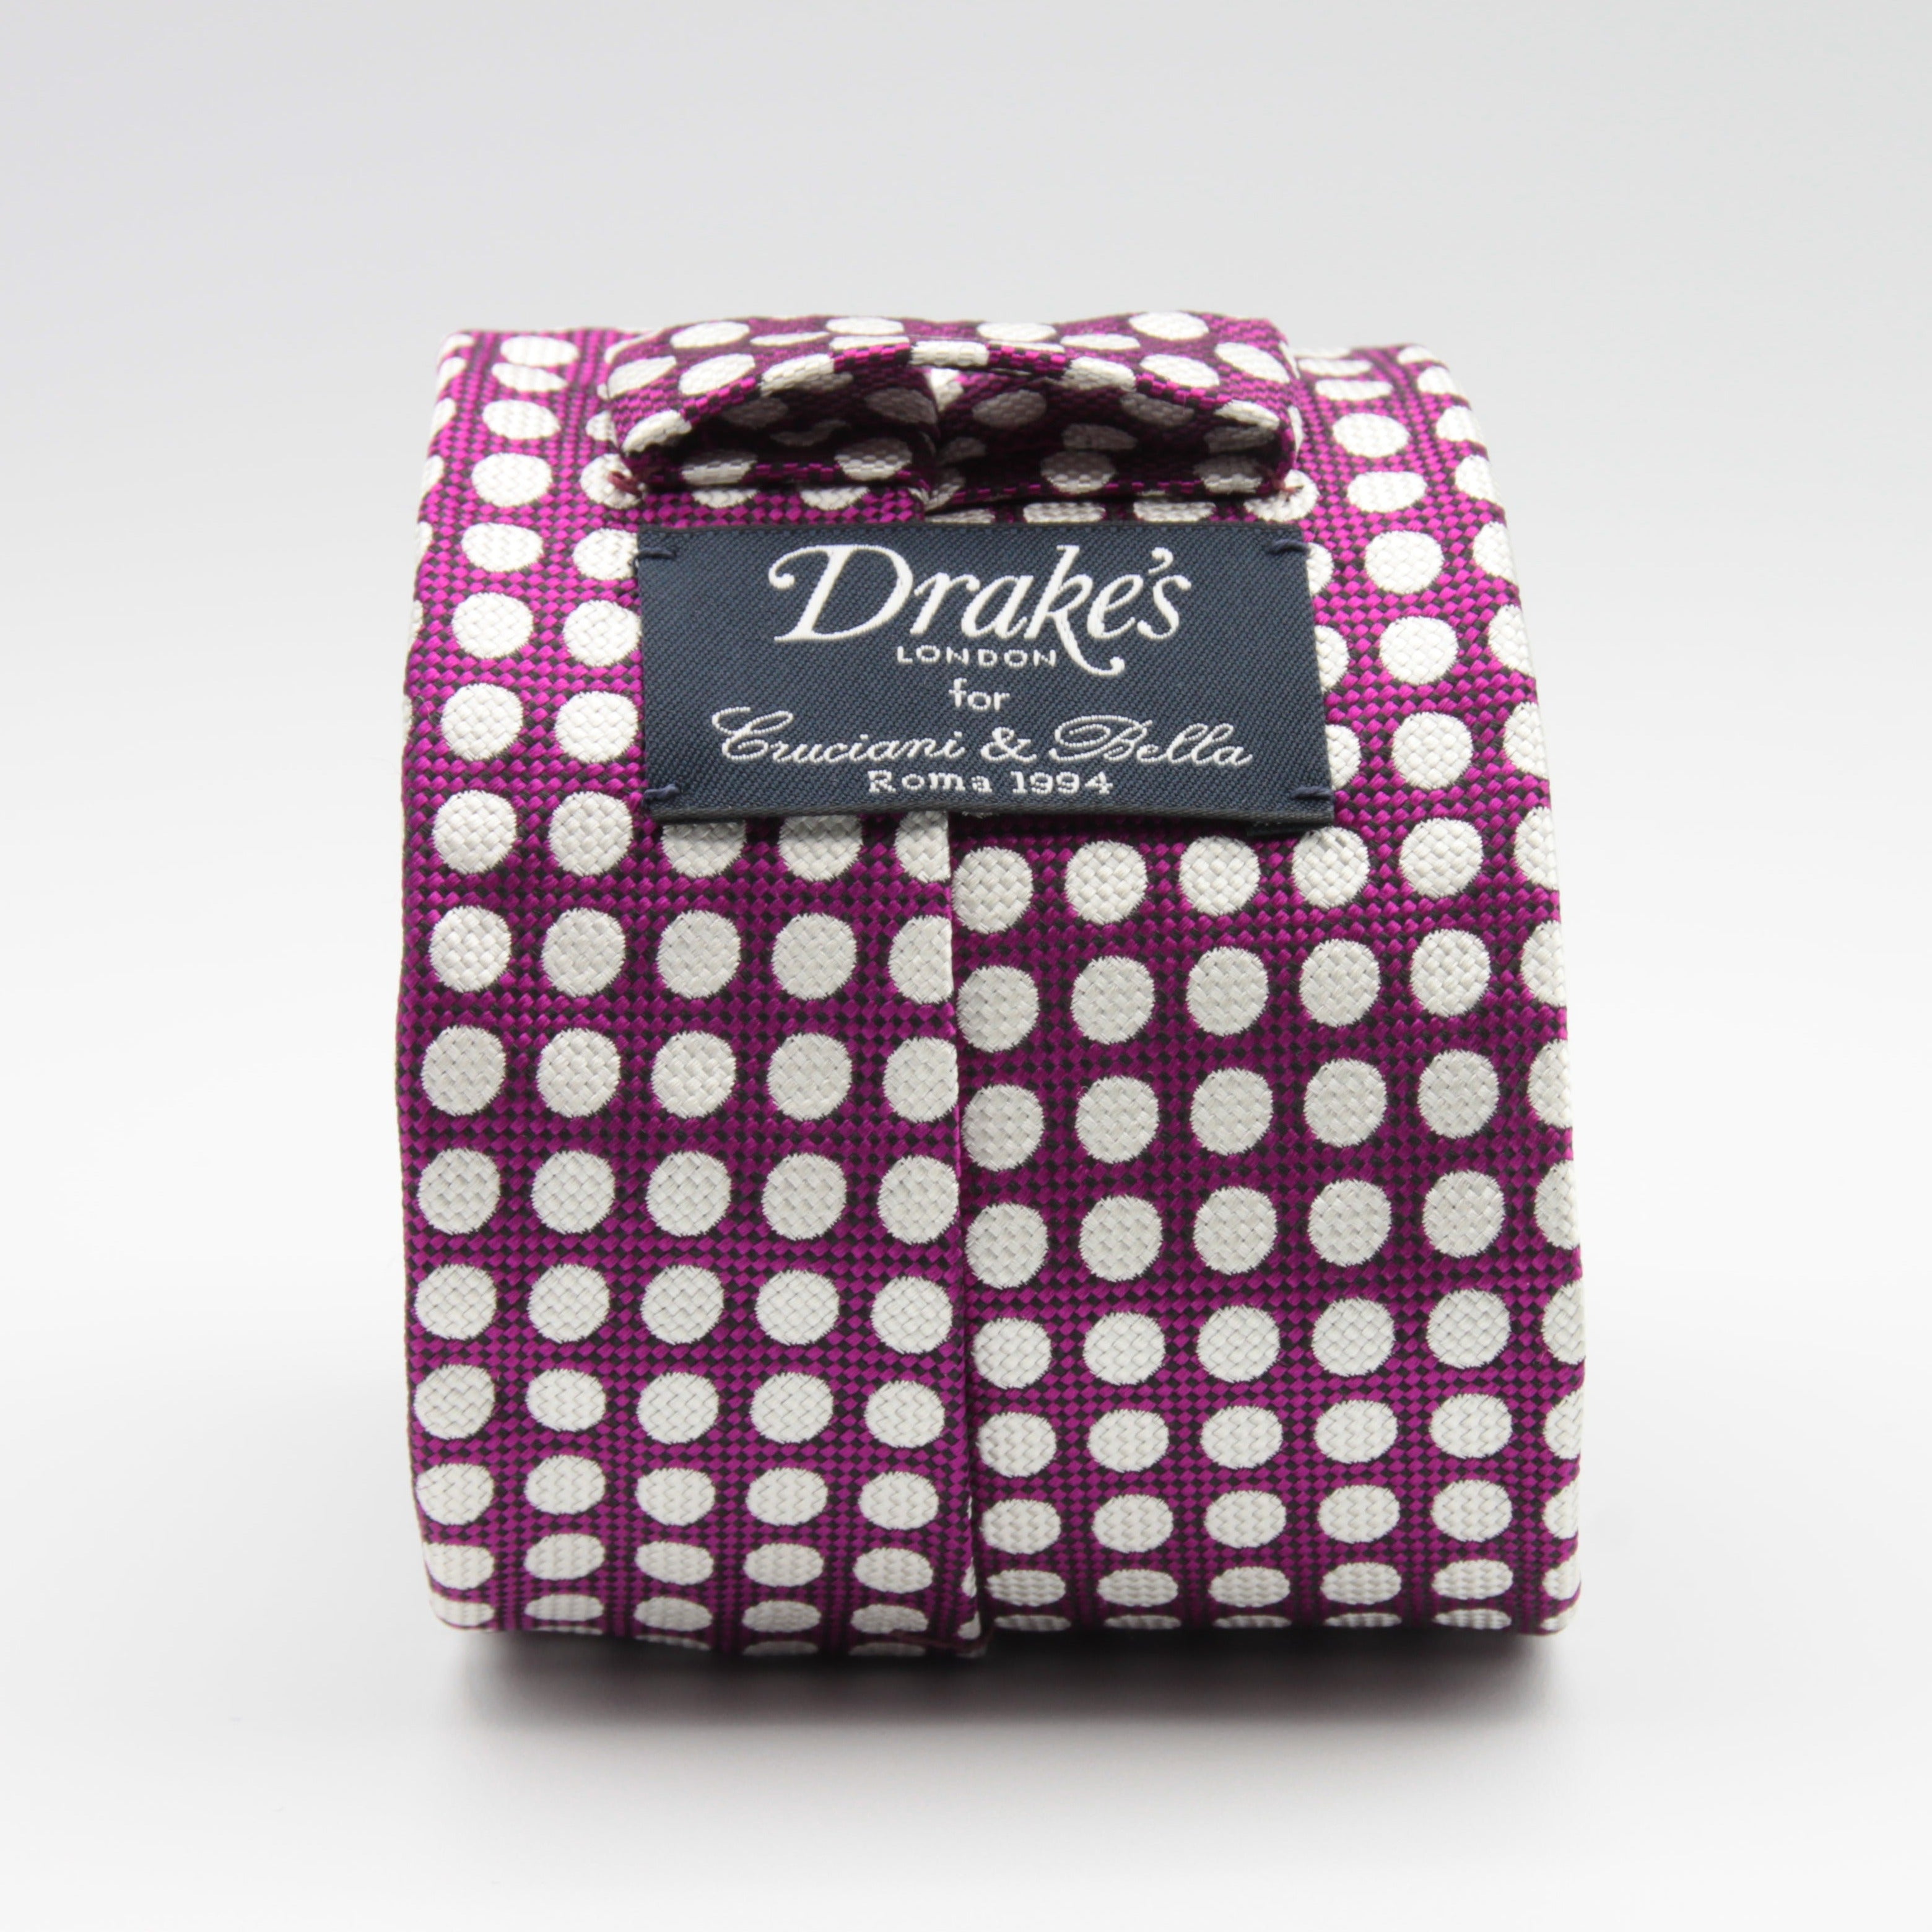 Drake's only for Cruciani & Bella 100% Silk Jacquard  Churchill's spot Fucsia and White tie Handmade in London. England 8 cm x 147 cm #4717